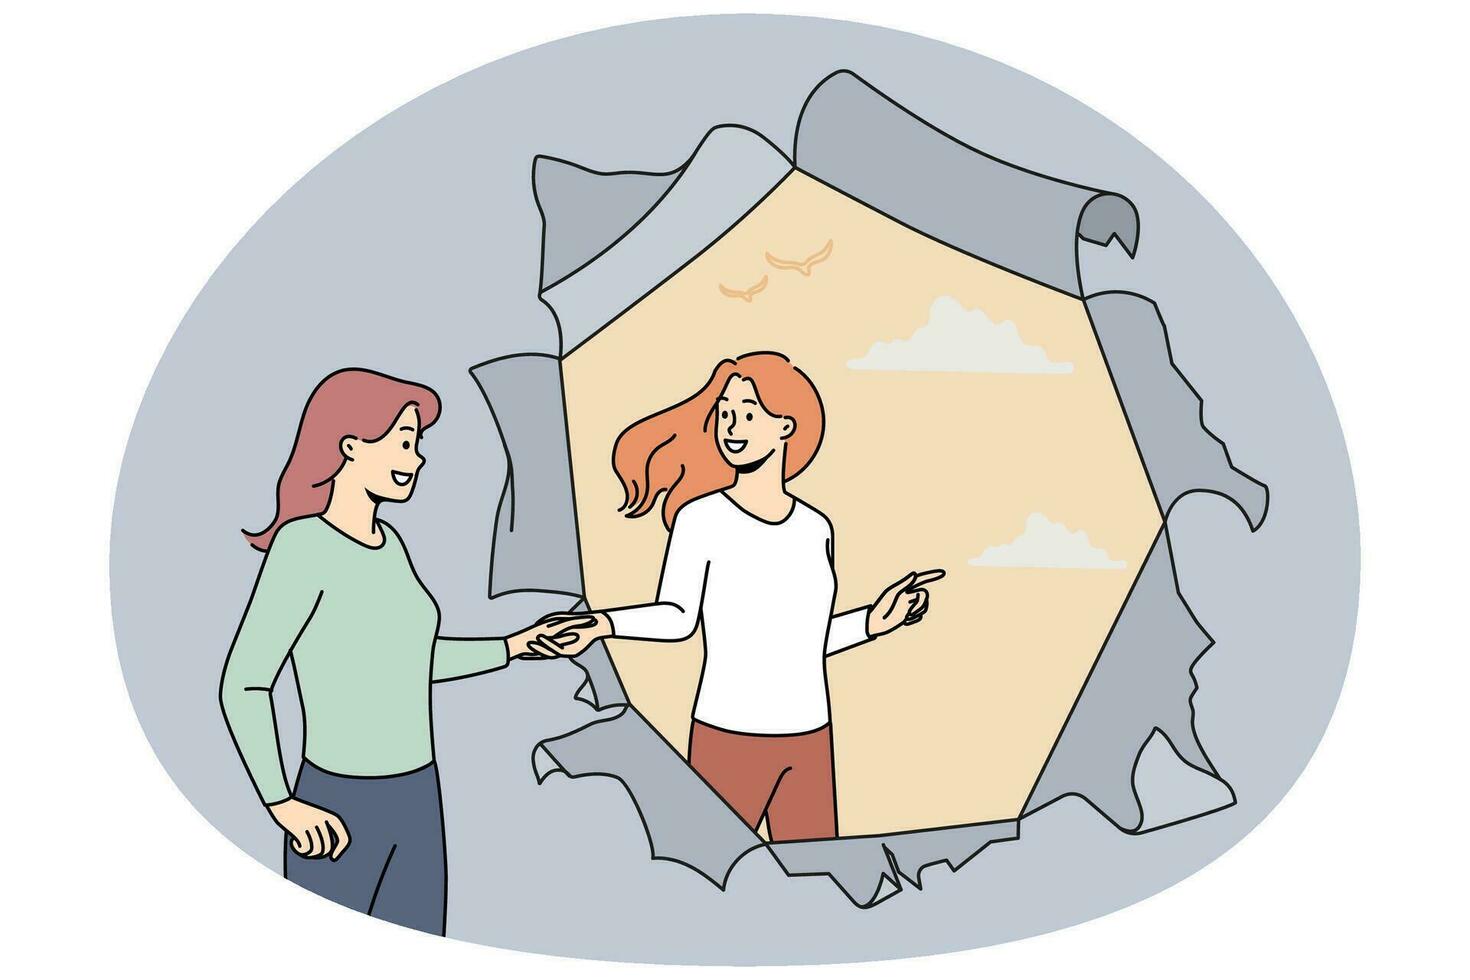 Woman helping friend get rid of depression or anxiety. Caregiver stretch helping hand to female struggling with mental problems. New life and stress relief. Vector illustration.